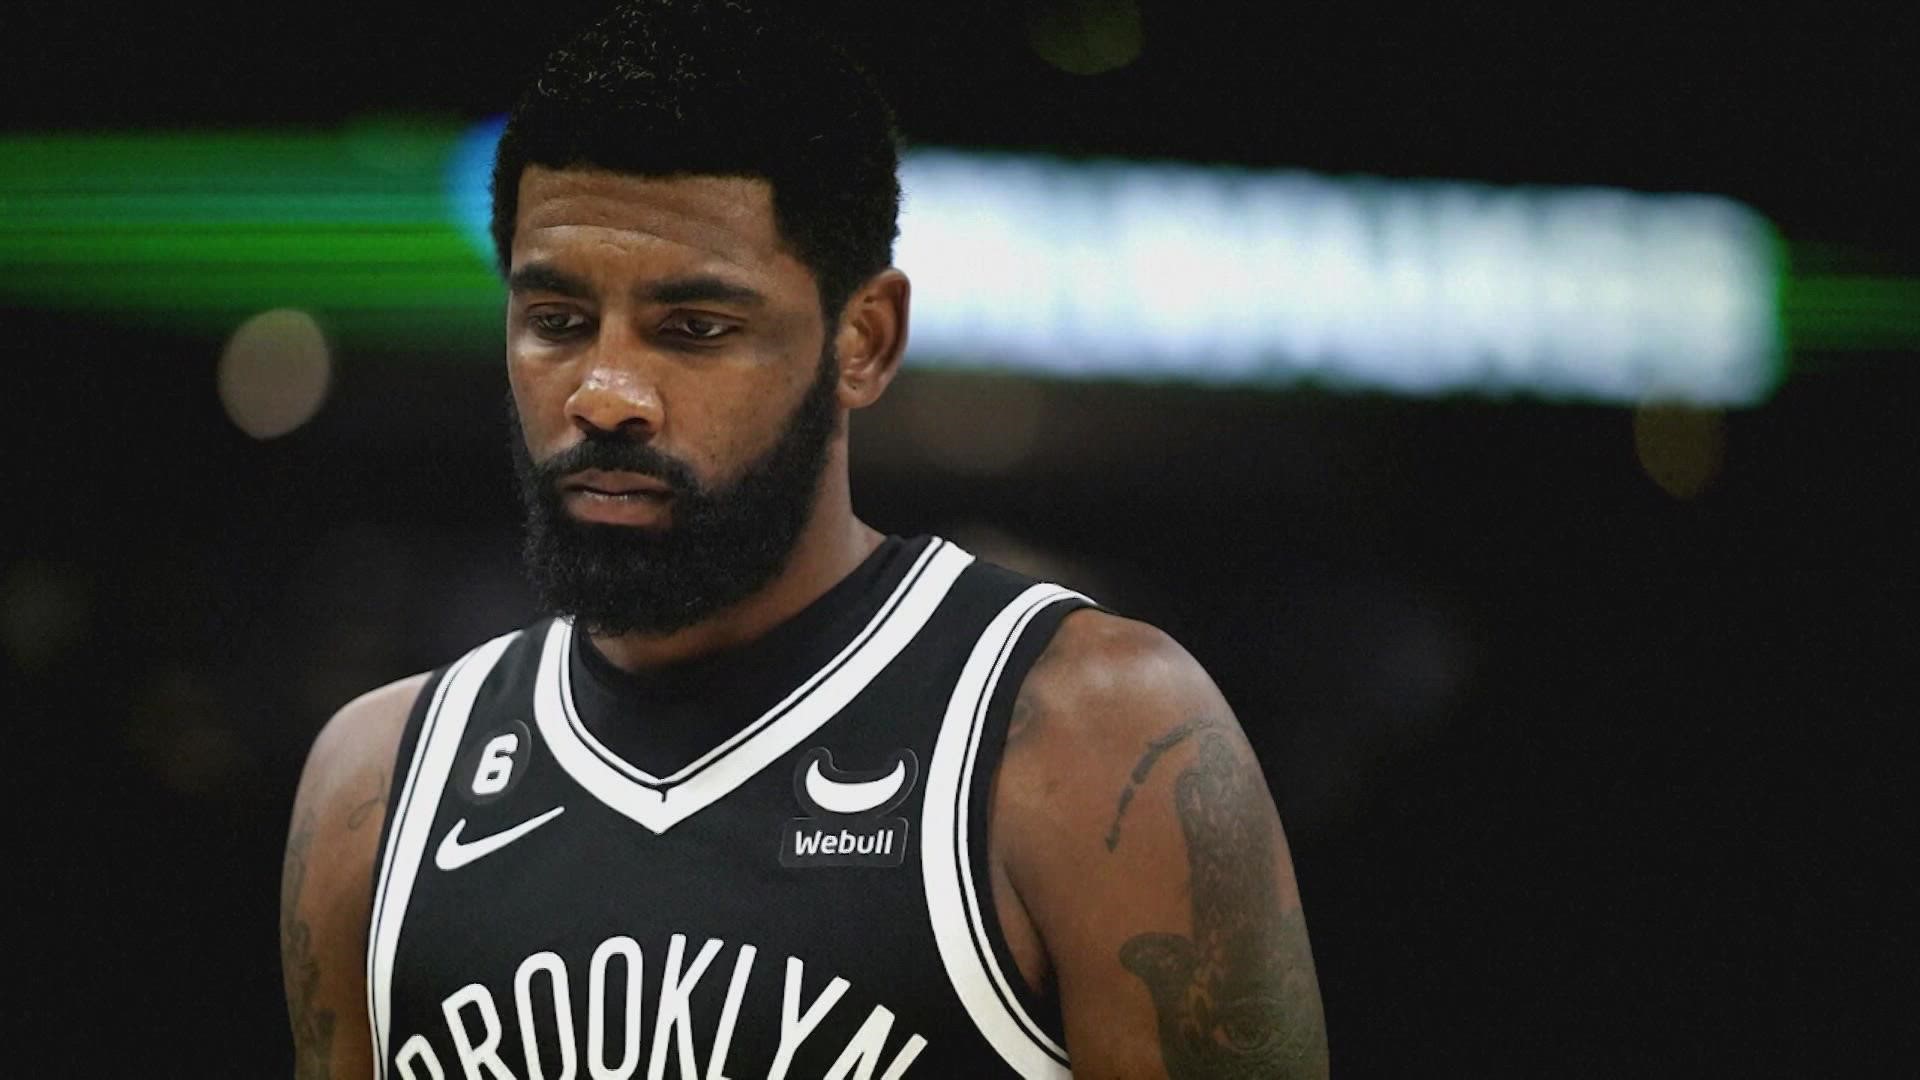 The team said in a statement that after Irving refused to say he had no antisemitic beliefs, he is "currently unfit to be associated with the Brooklyn Nets.”